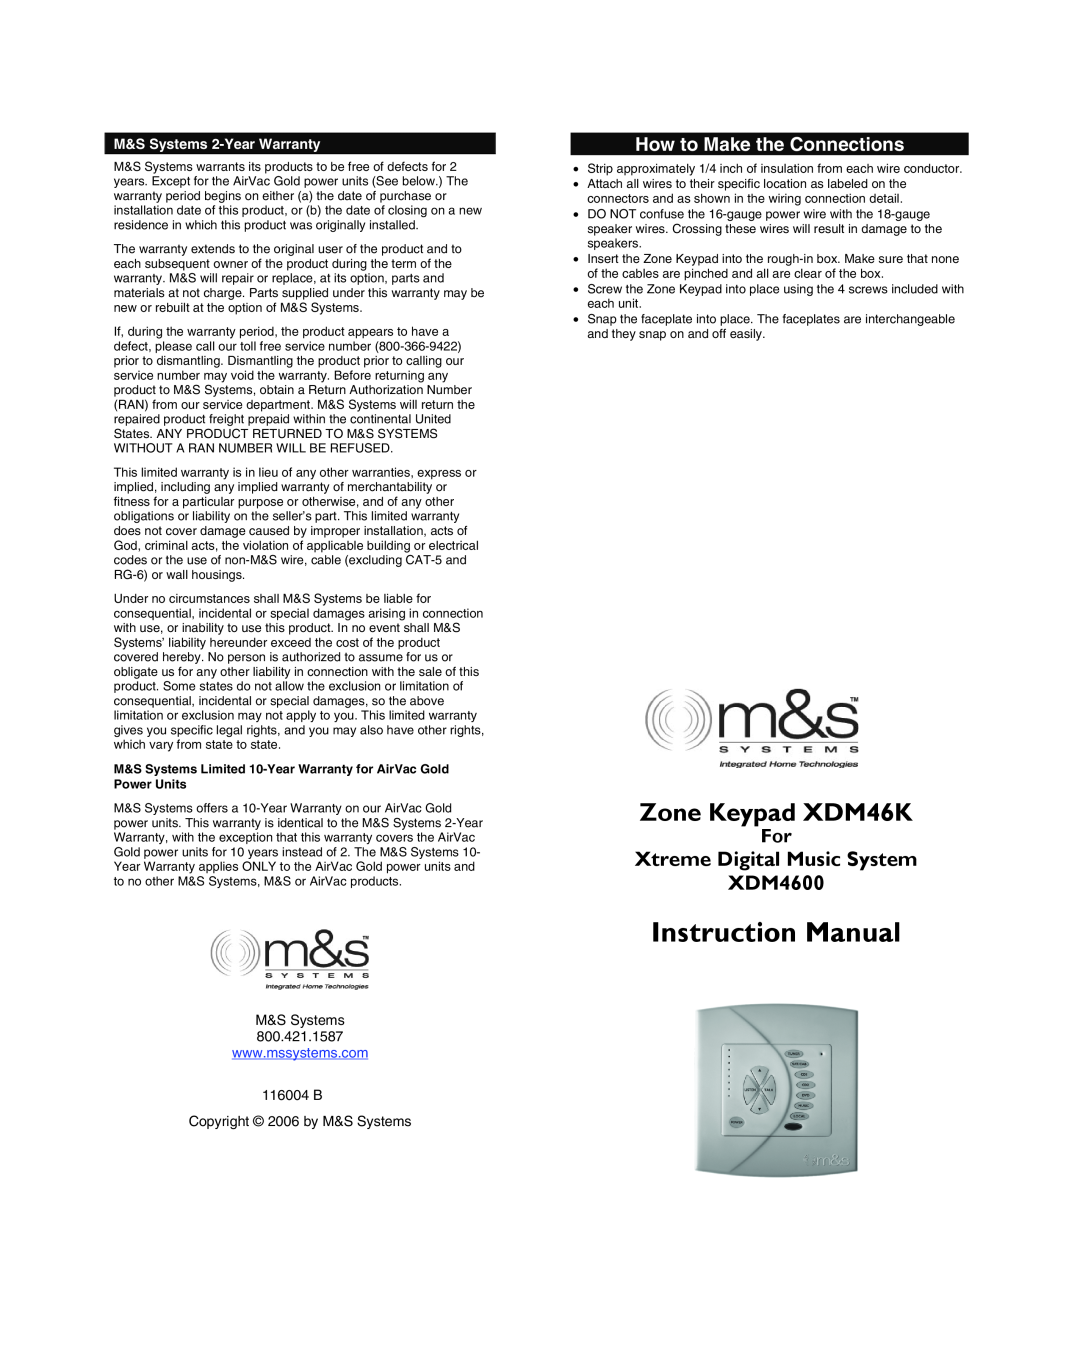 M&S Systems instruction manual How to Make the Connections, Instruction Manual, Zone Keypad XDM46K 